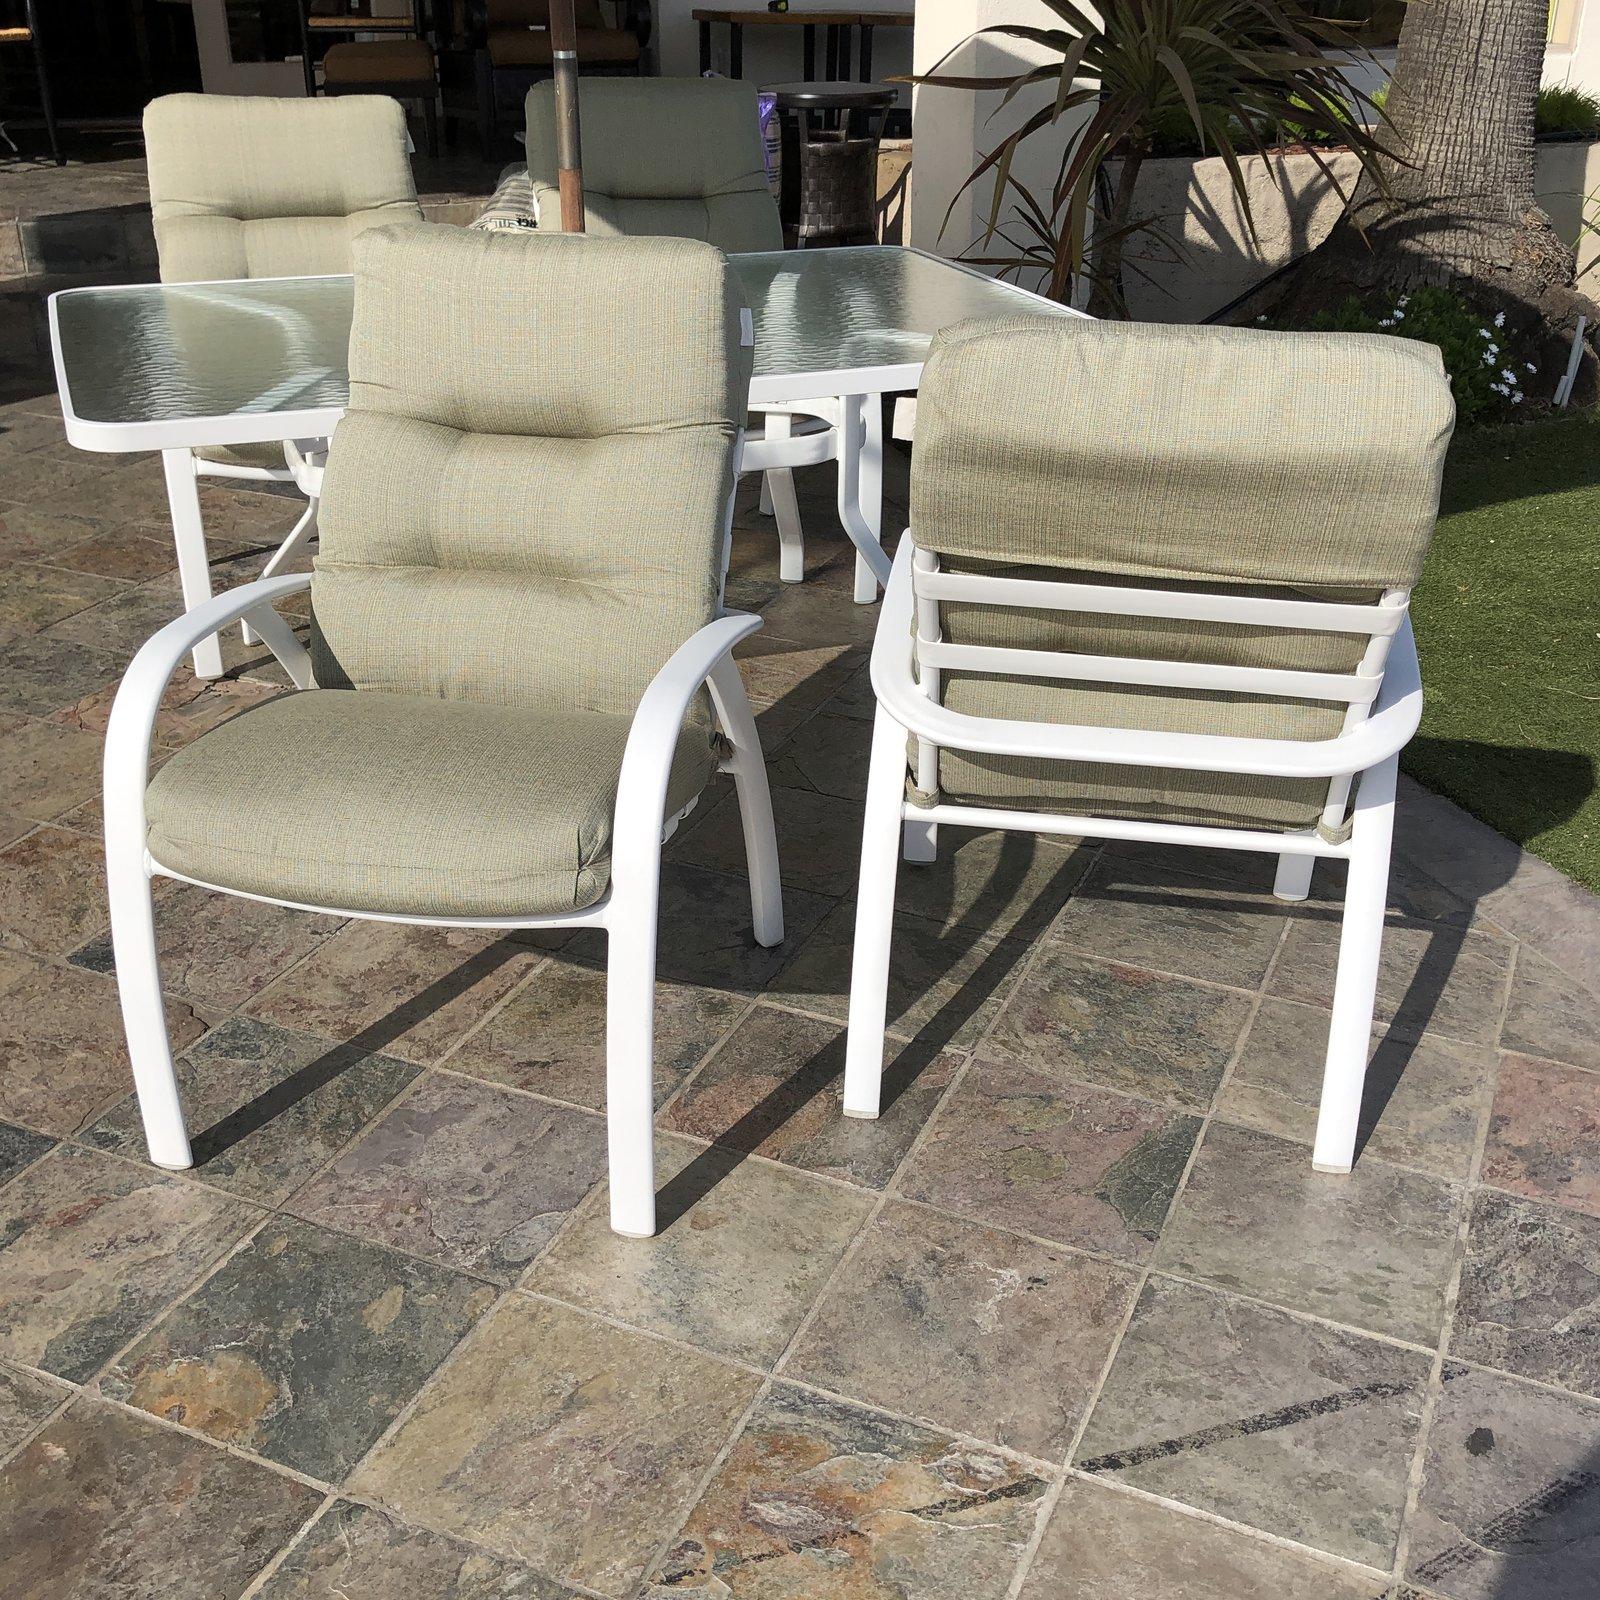 Tropitone Table, Four Chairs and Umbrella For Sale 4